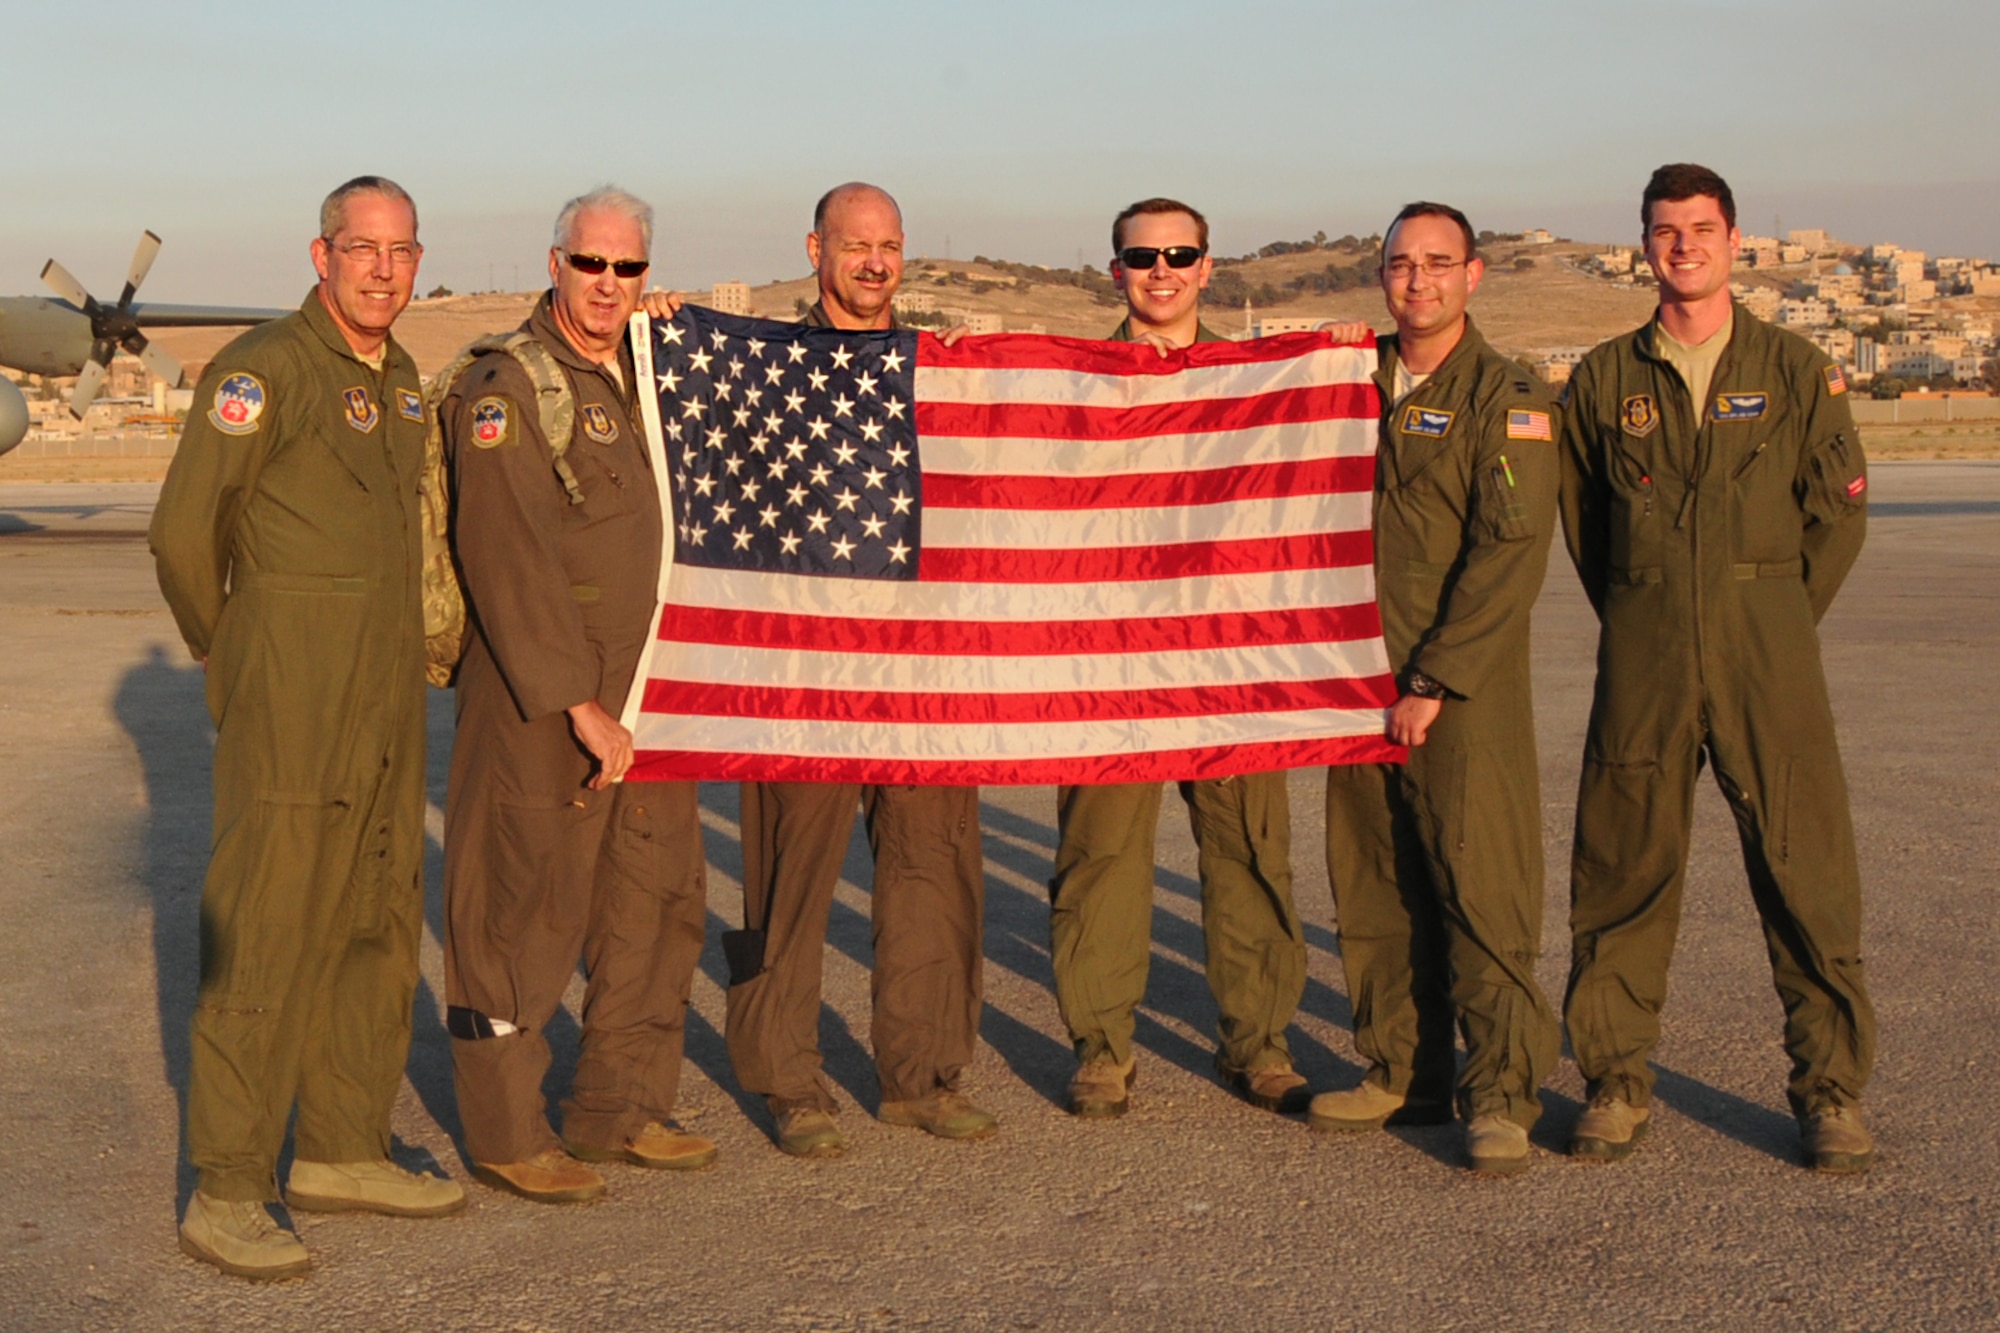 700th Airlift Squadron aircrew members display an American flag that flew on their C-130 flight over Jordan in support of Exercise Eager Lion, May 19, 2016. This year, Eager Lion was a bilateral exercise including the U.S. and Jordanian military forces. (U.S. Air Force photo/Staff Sgt. Alan Abernethy)
